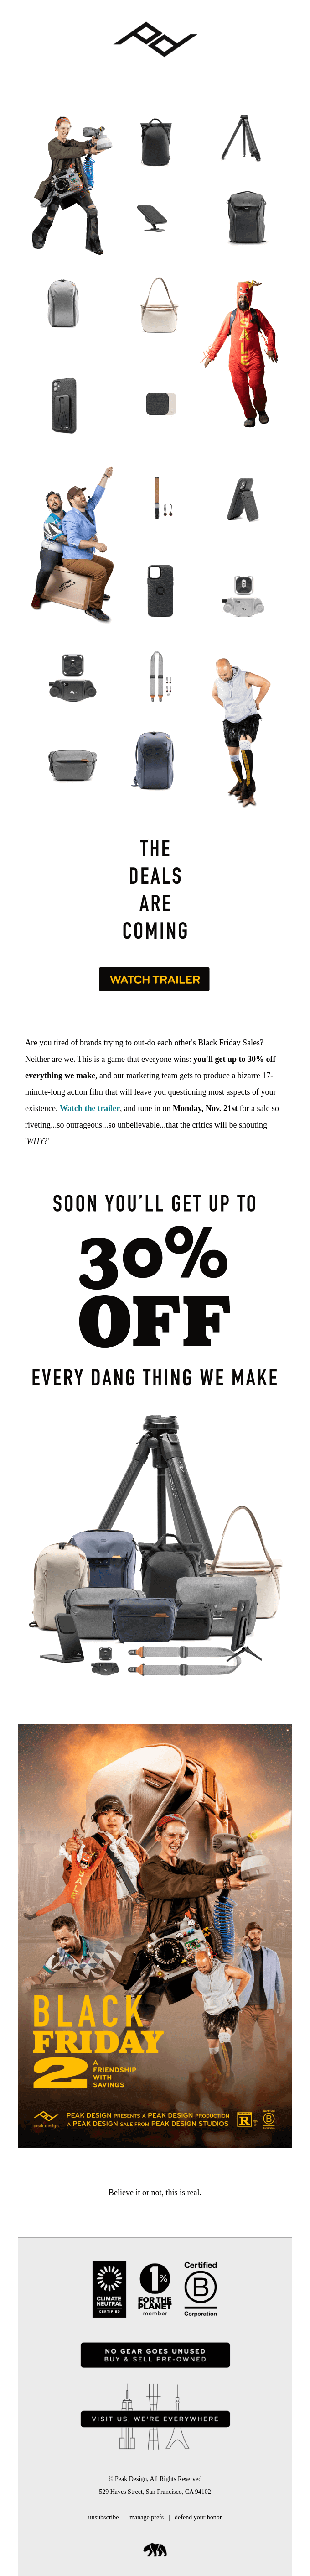 Black Friday email from Peak Design featuring the characters of a movie about Black Friday shot by the brand